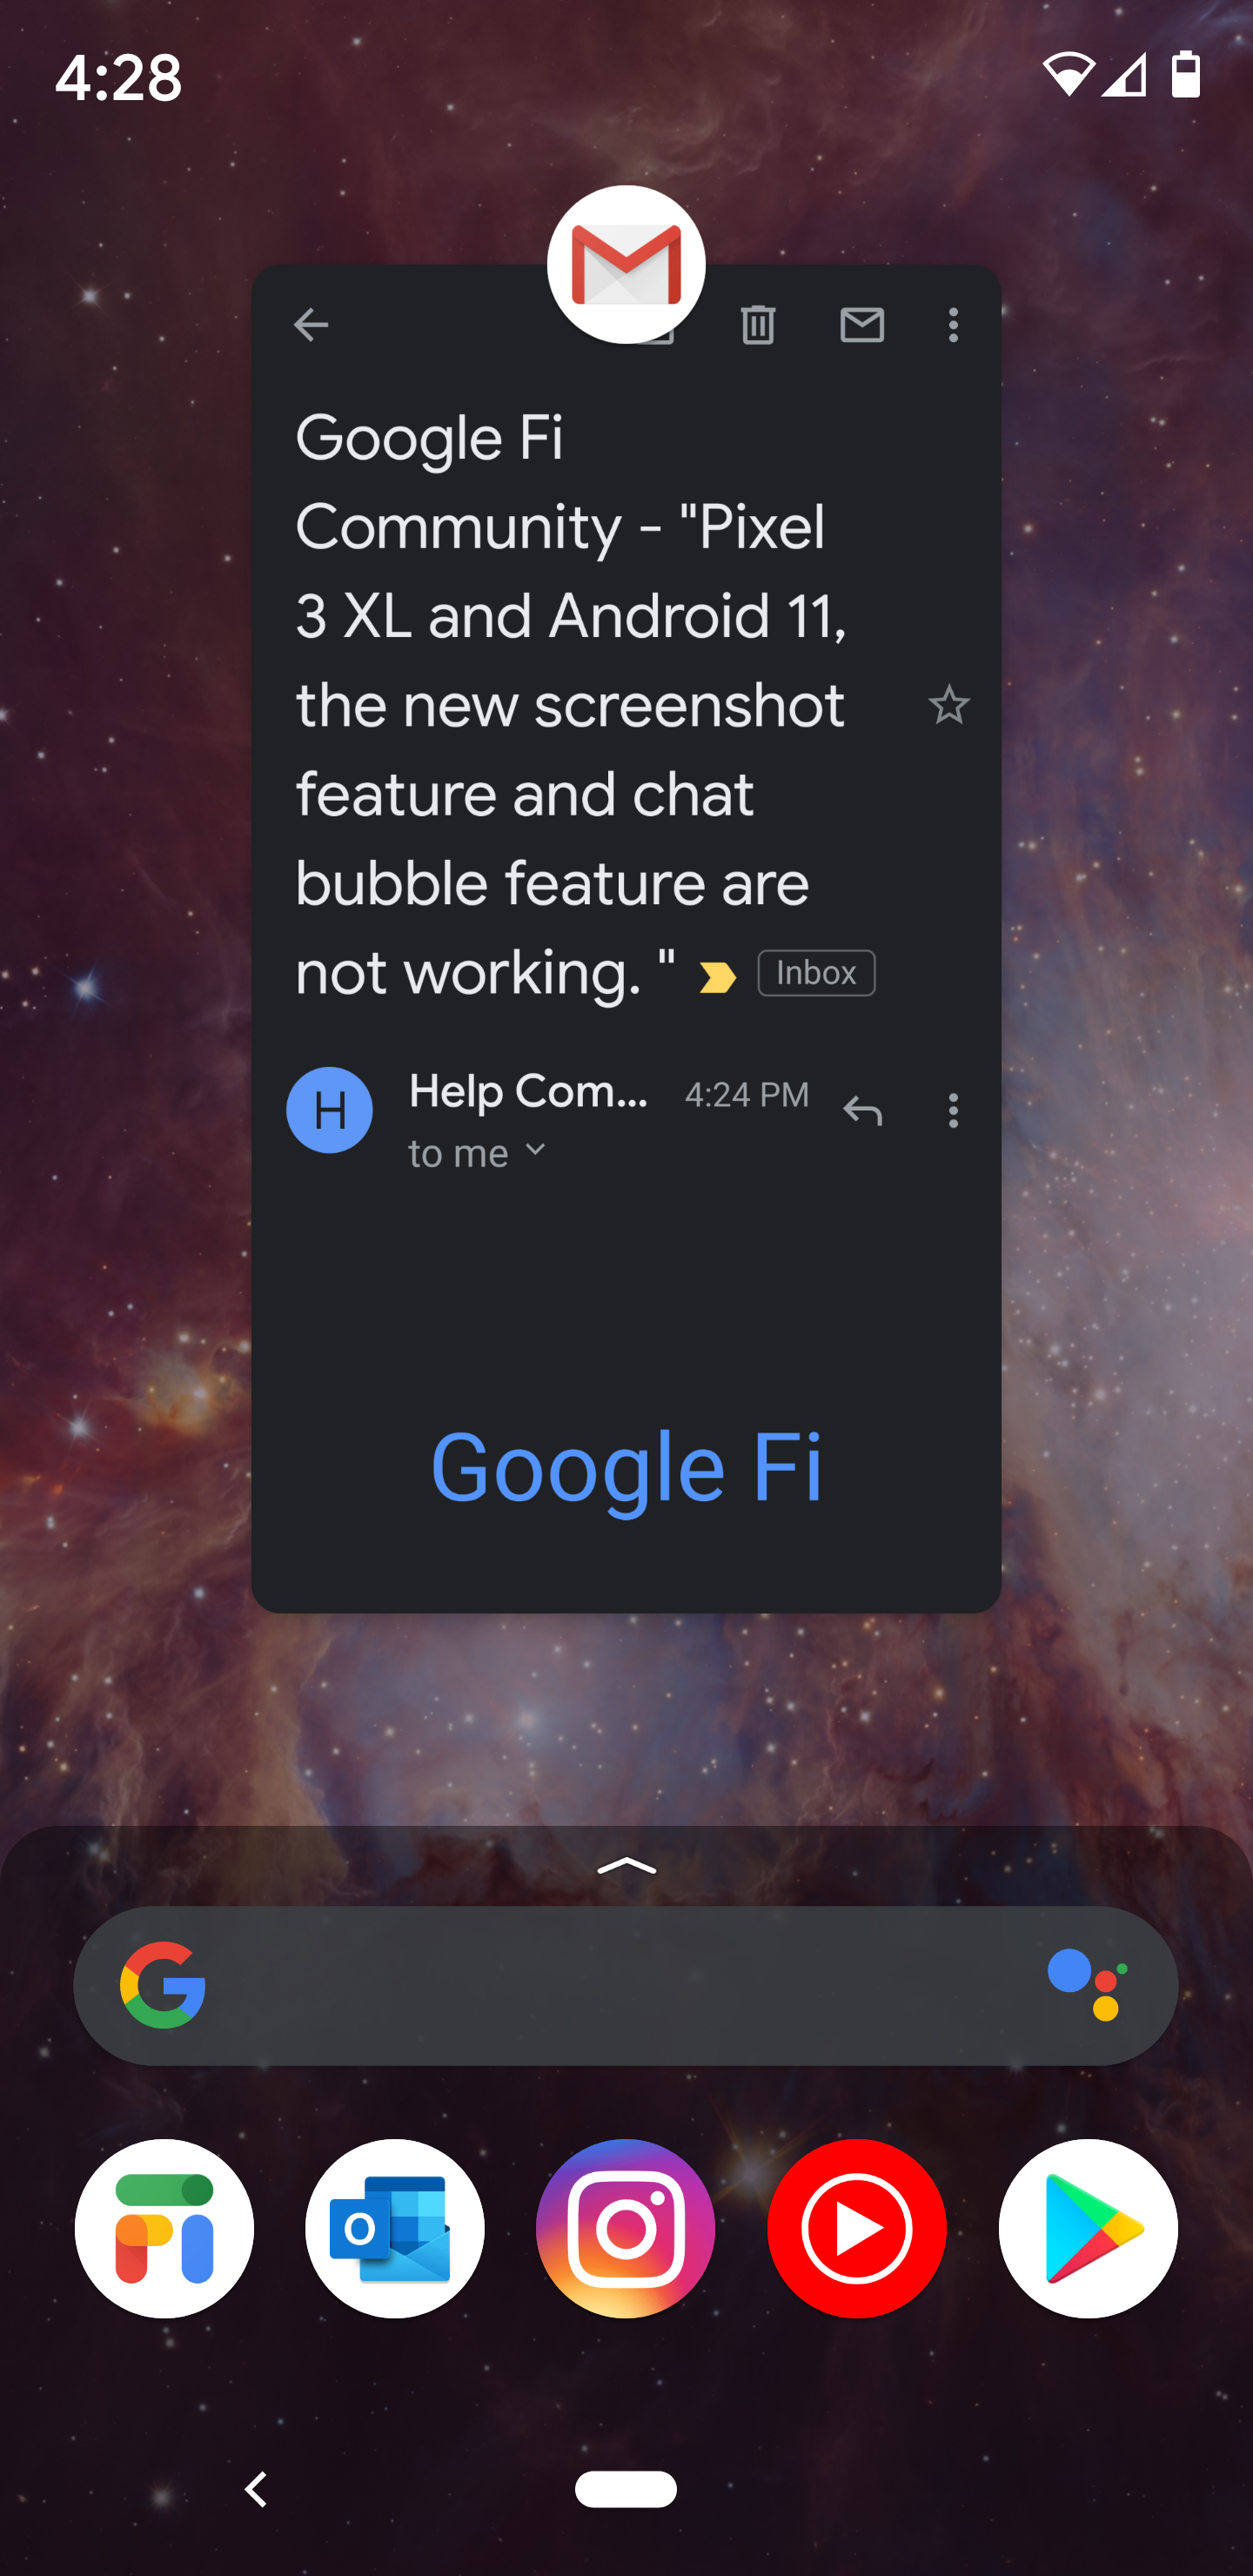 Pixel 3 Xl And Android 11 The New Screenshot Feature And Chat Bubble Feature Are Not Working Google Fi Community